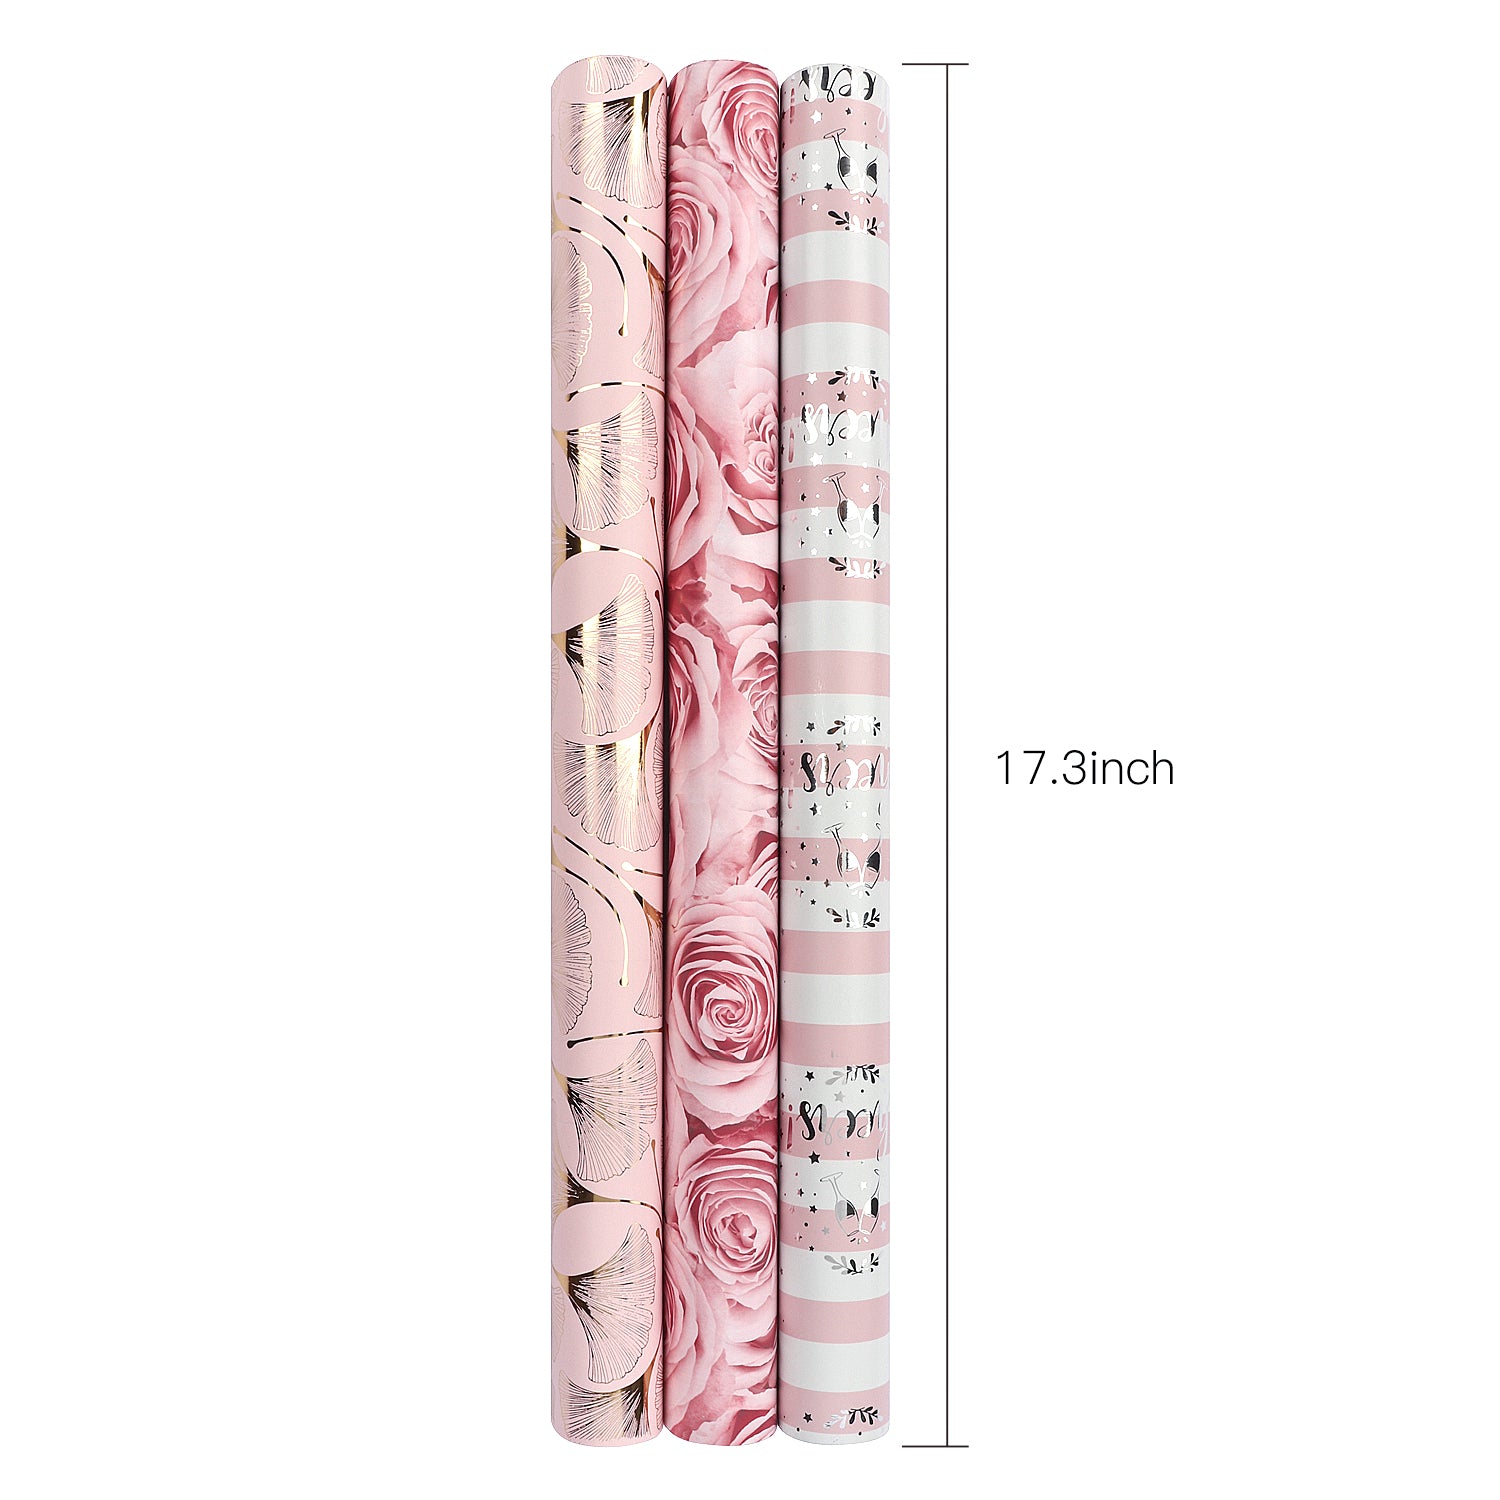 MAYPLUSS Gift Wrapping Paper Roll - 3 Different Pink Floral